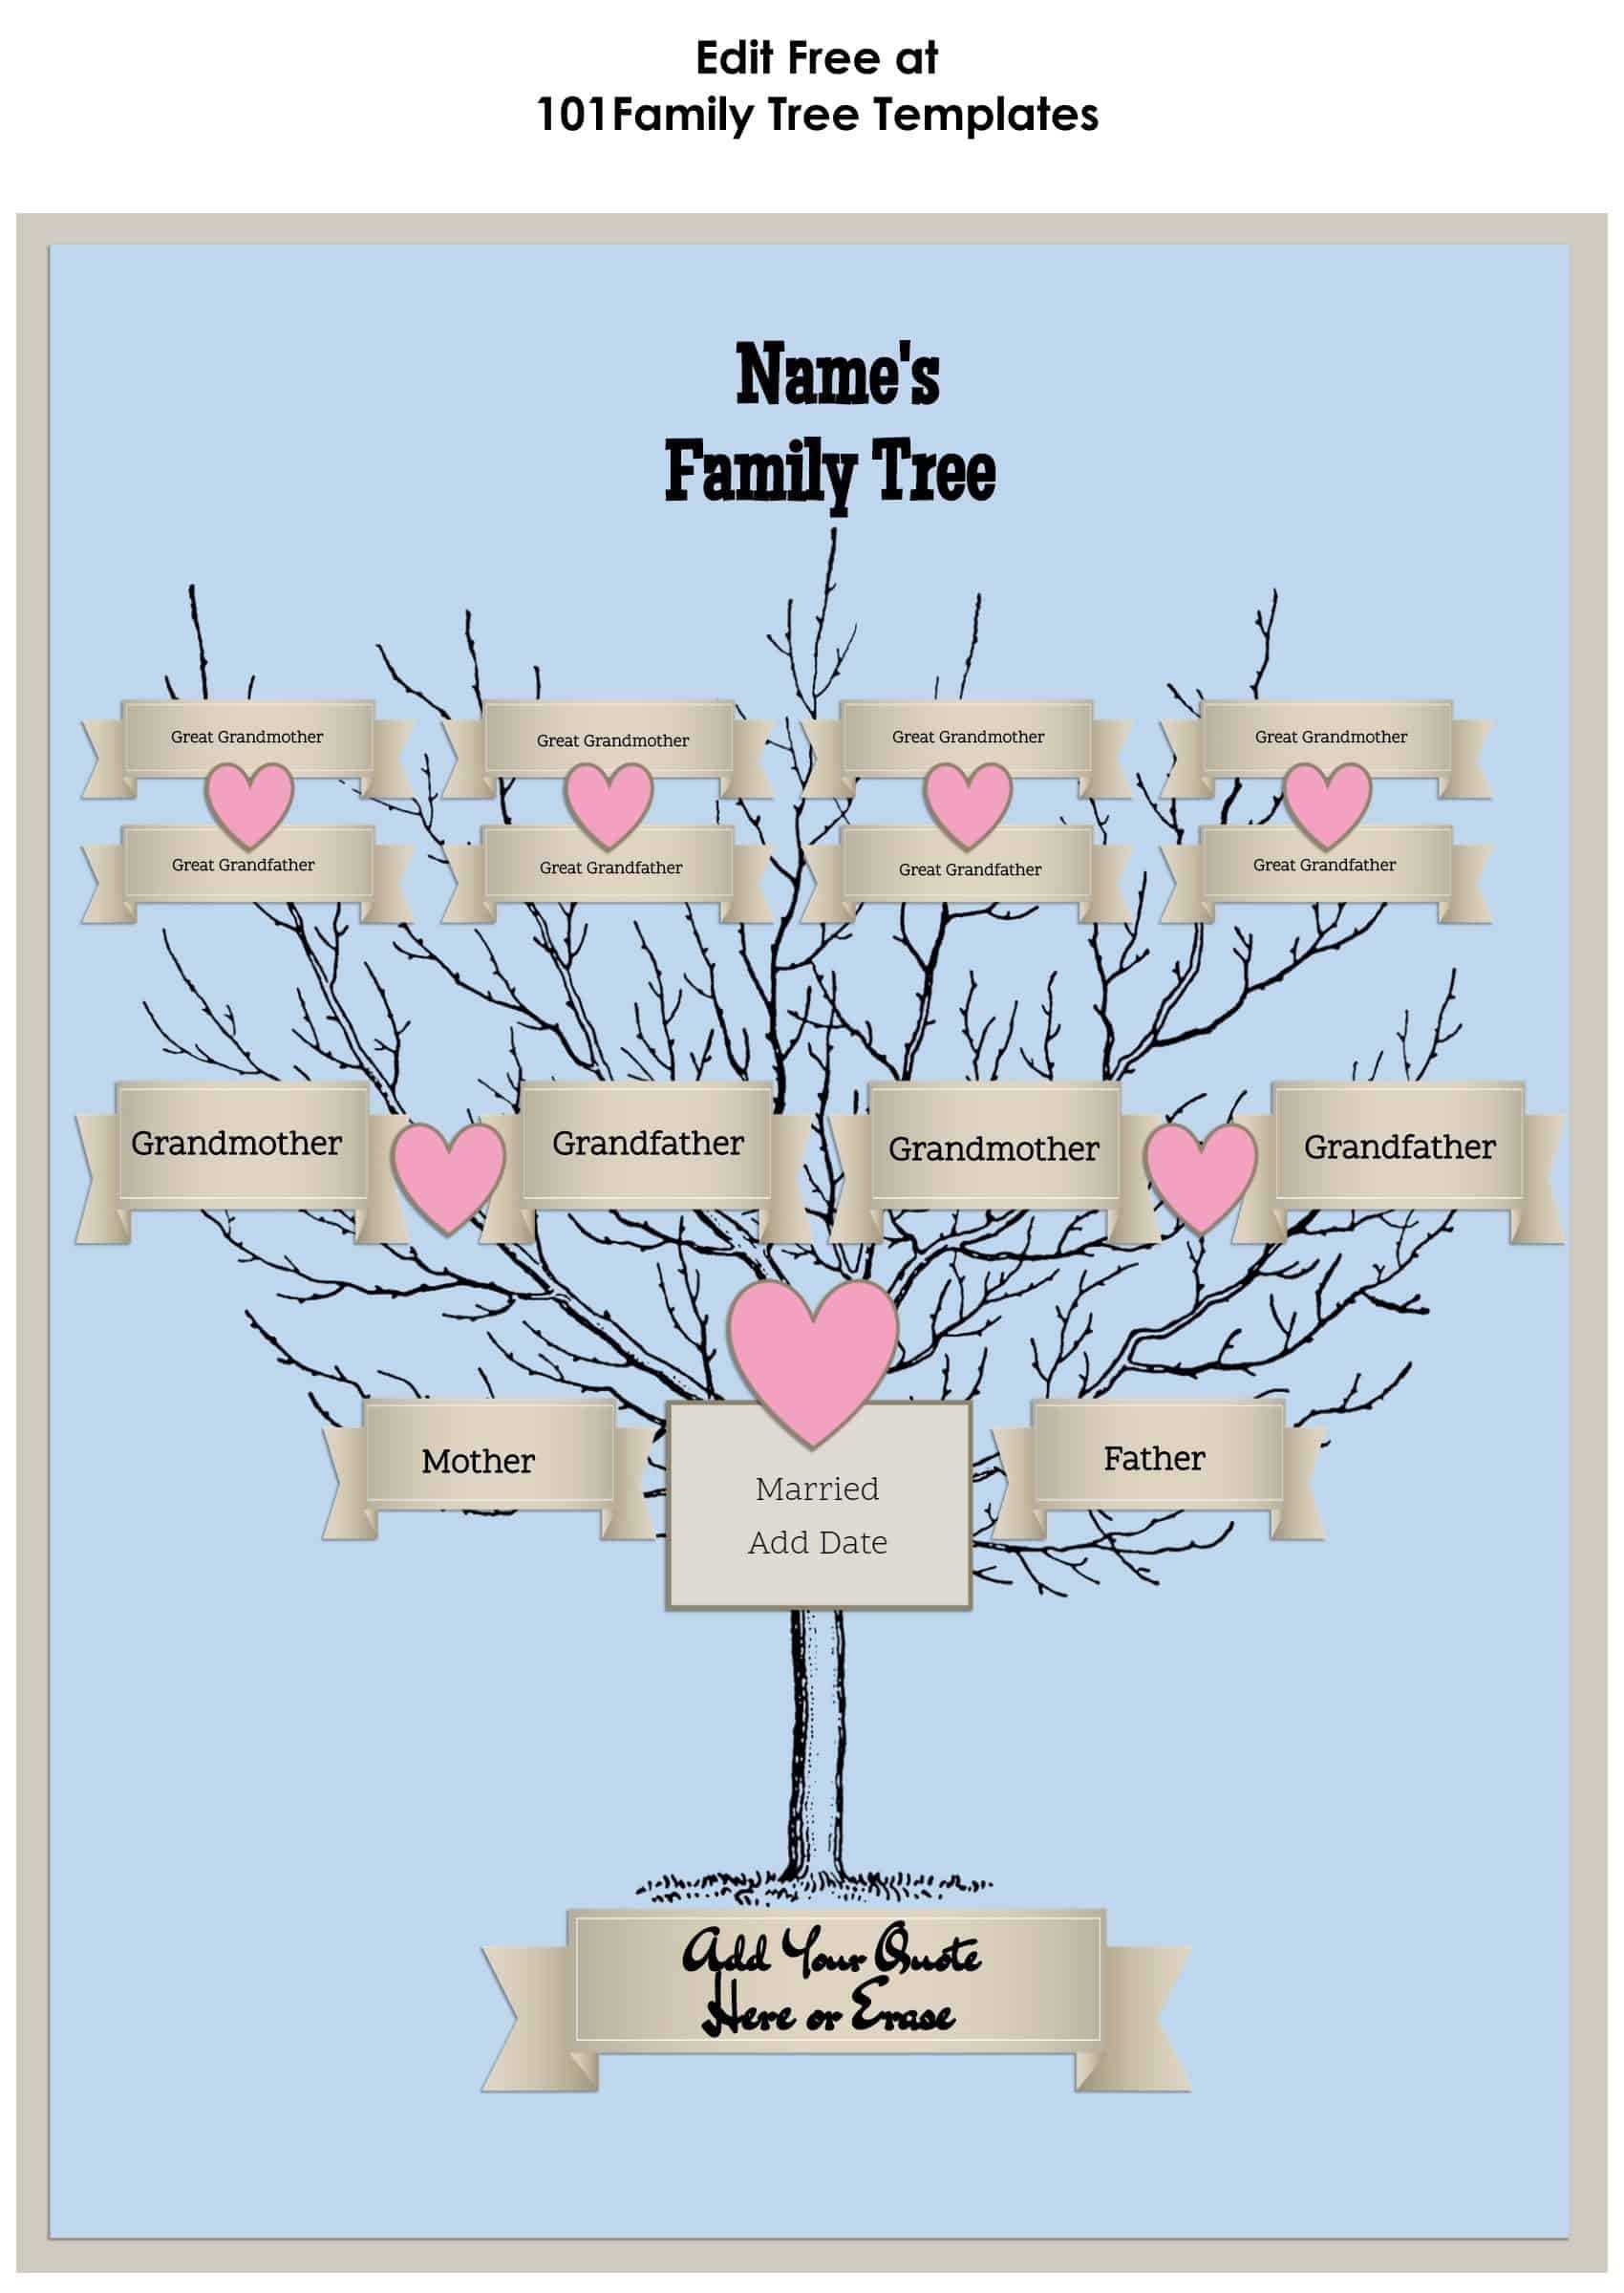 017 Free Editable Family Tree Template Ideas Outstanding Intended For 3 Generation Family Tree Template Word